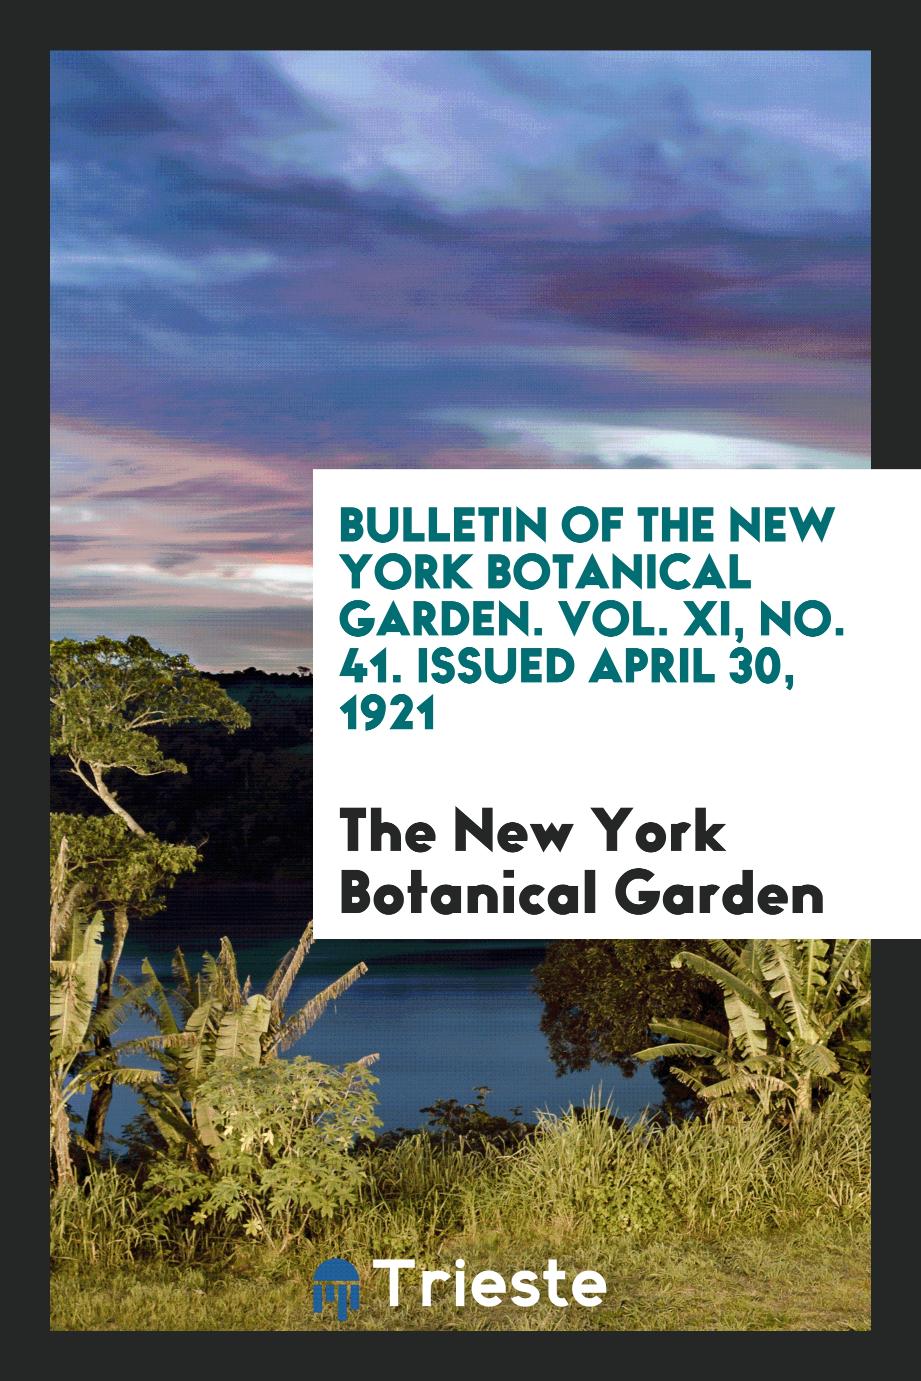 Bulletin of the New York Botanical Garden. Vol. XI, No. 41. Issued April 30, 1921